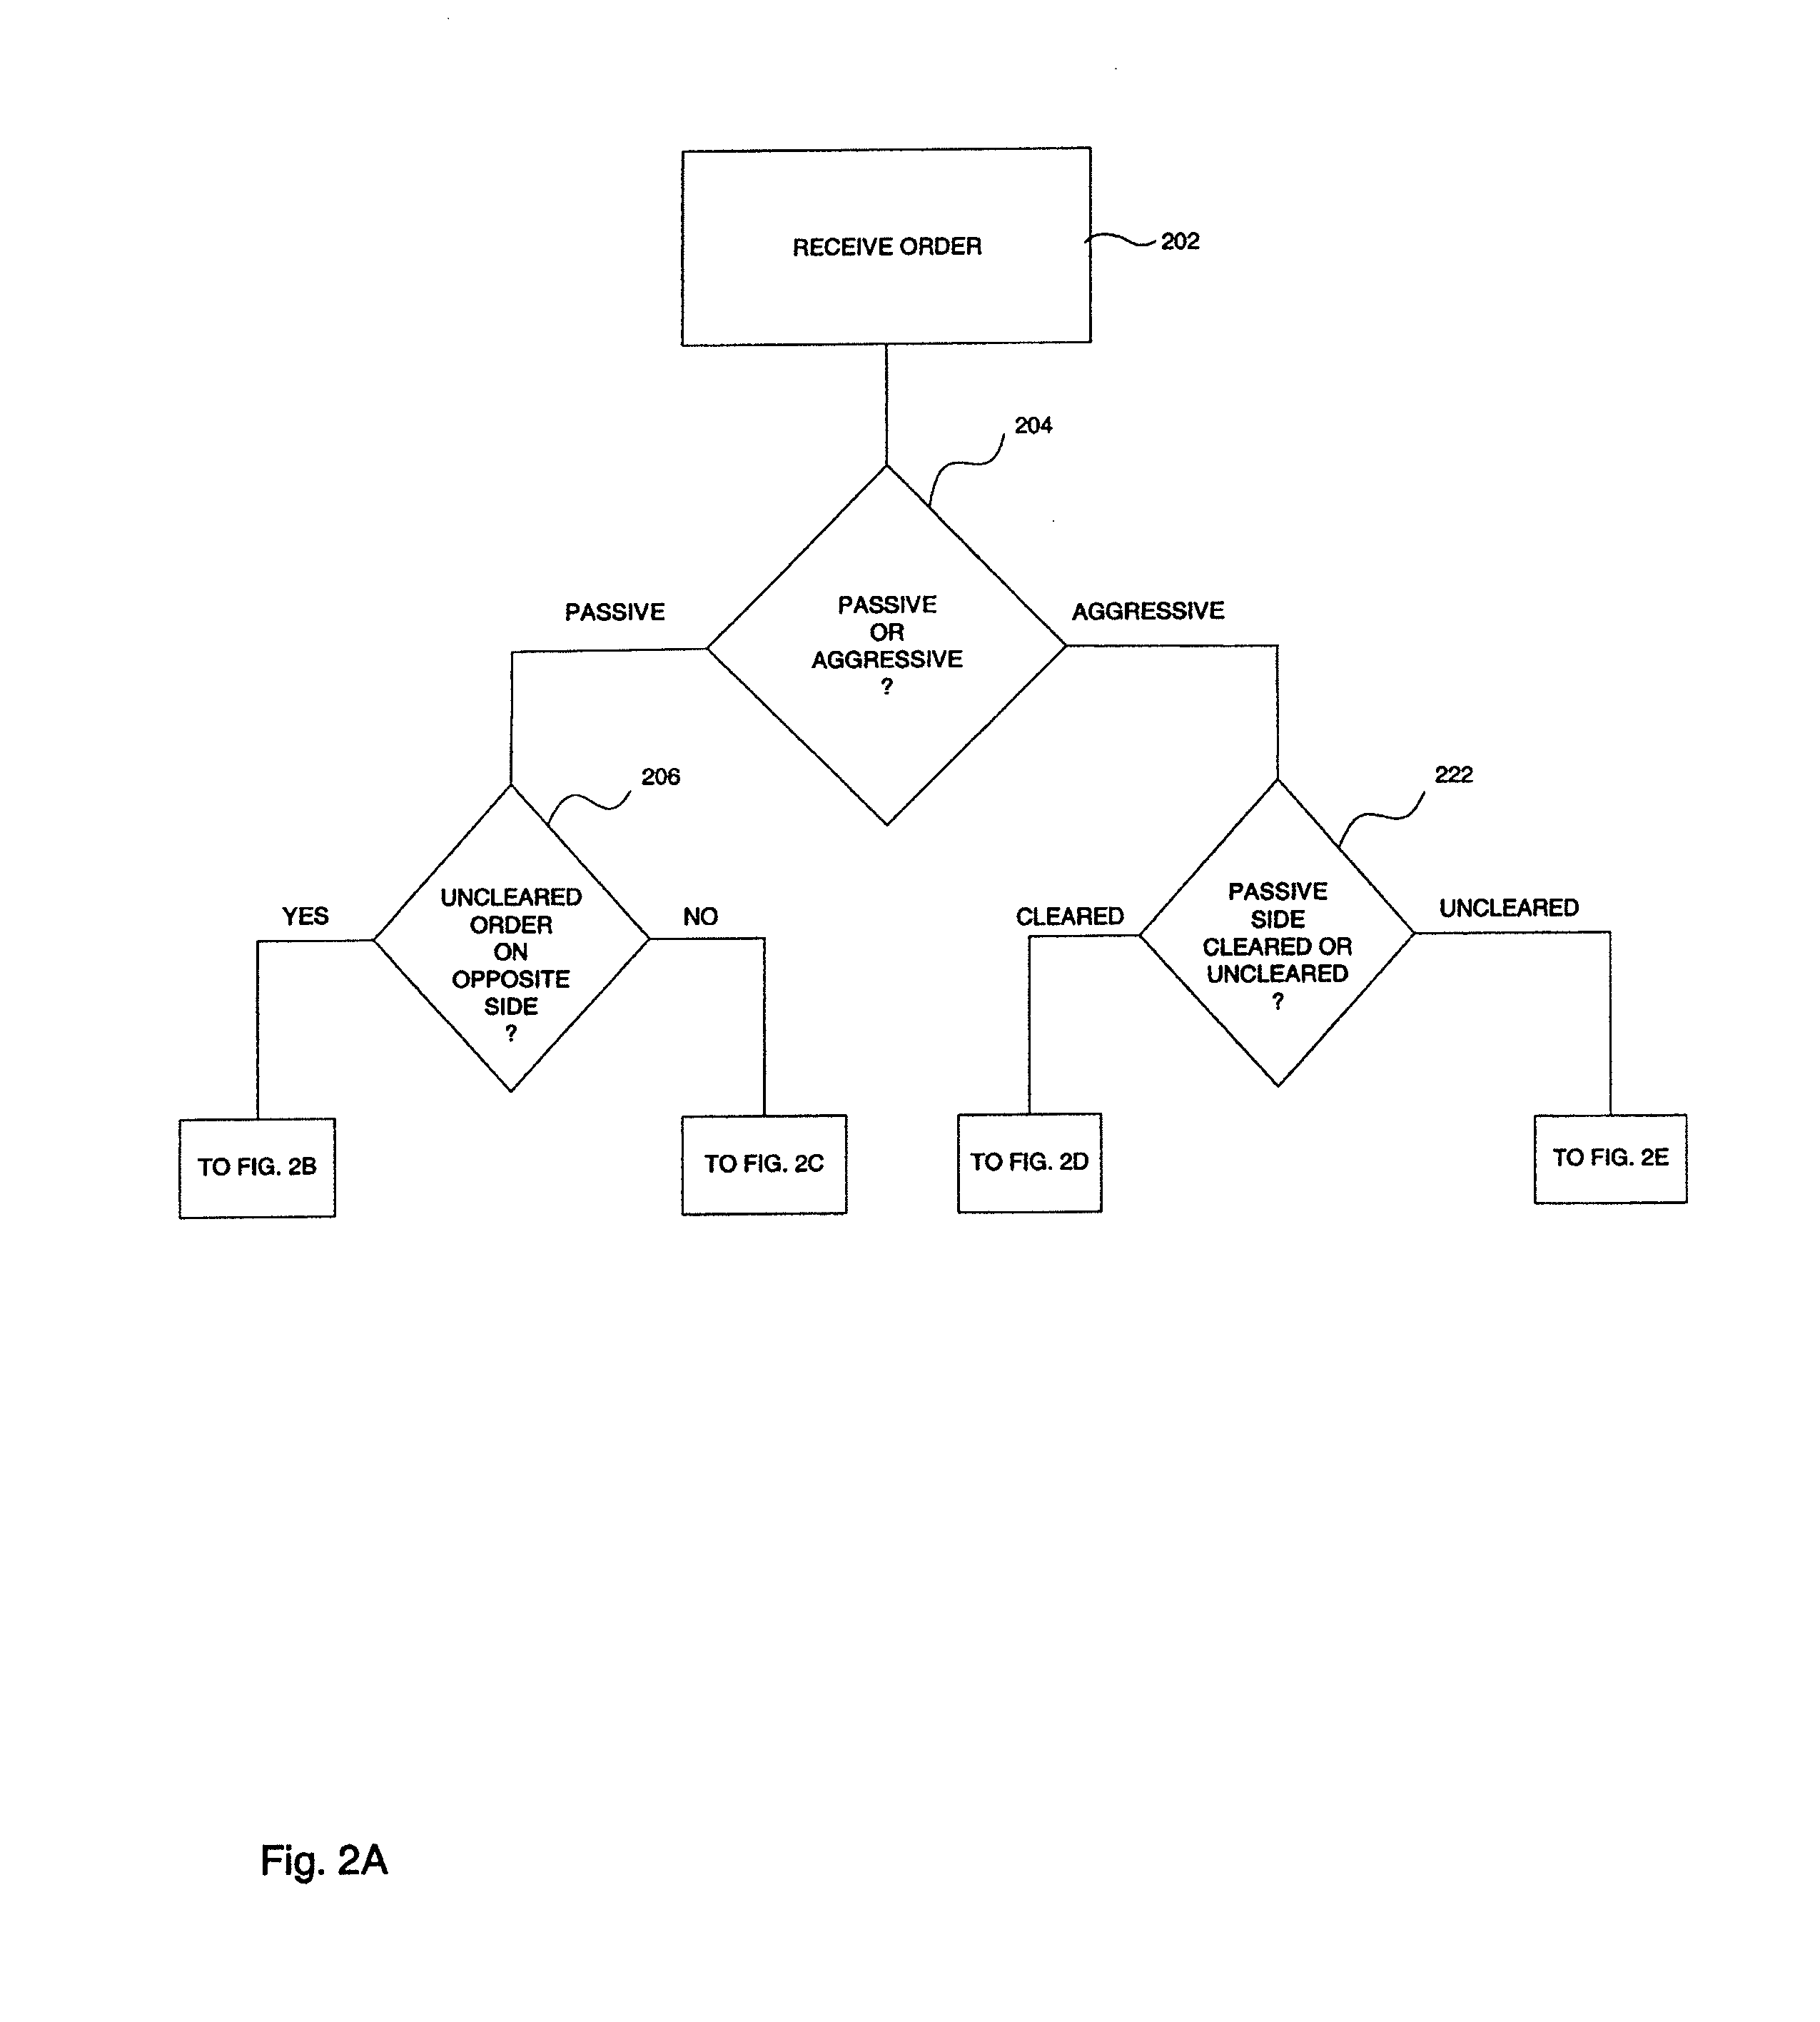 System and method for processing trading orders